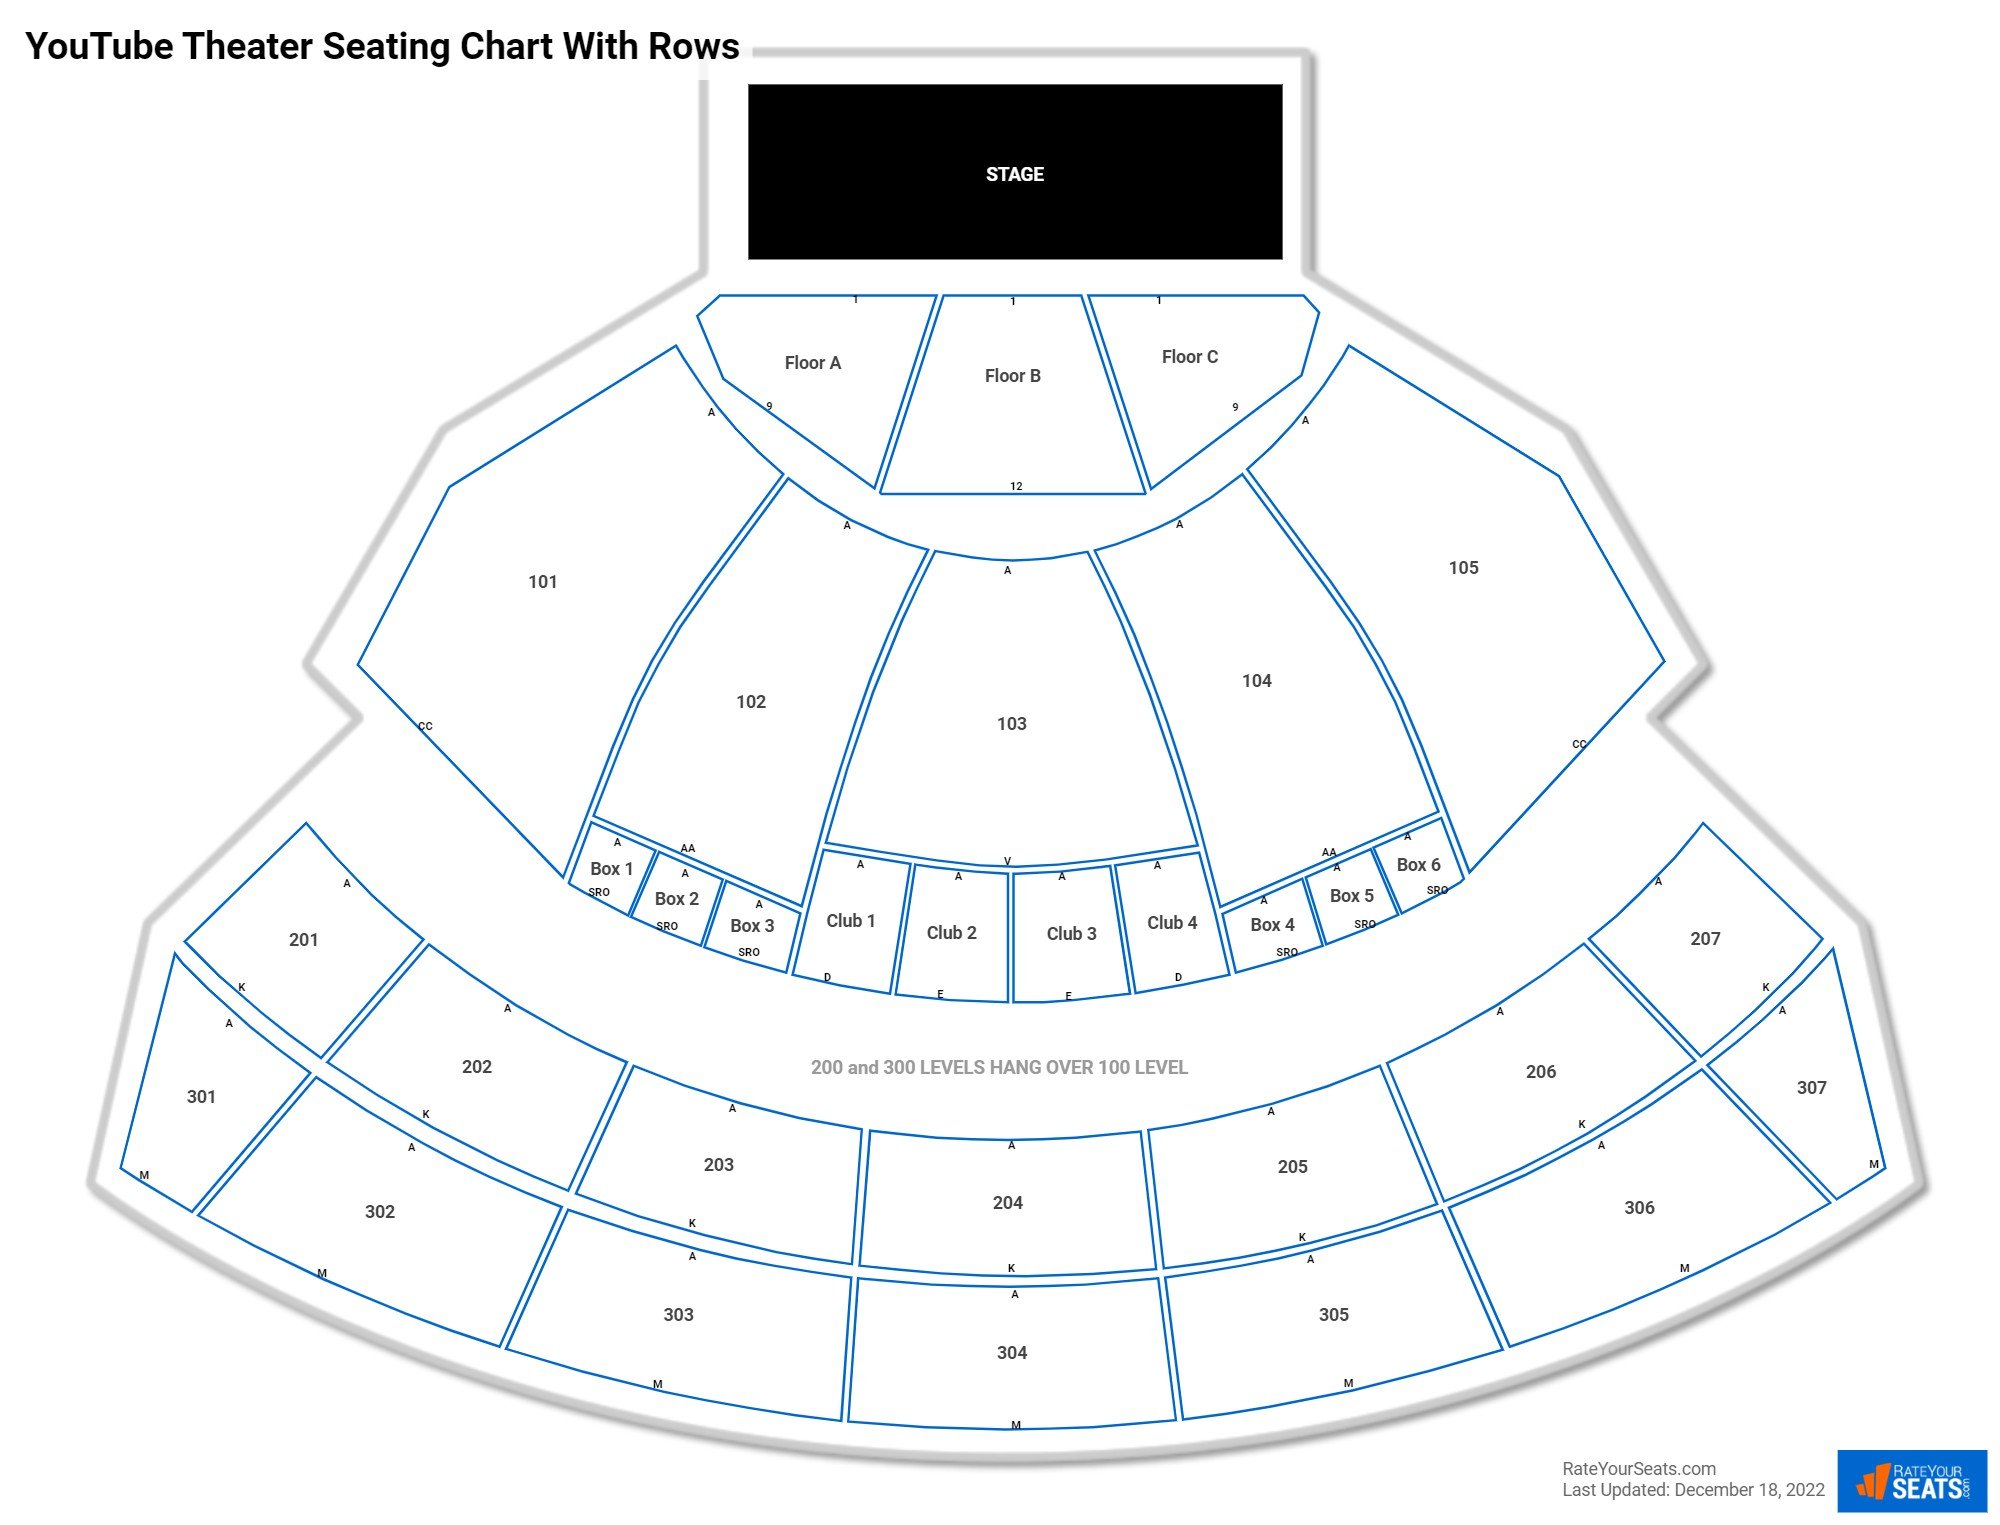 YouTube Theater seating chart with row numbers